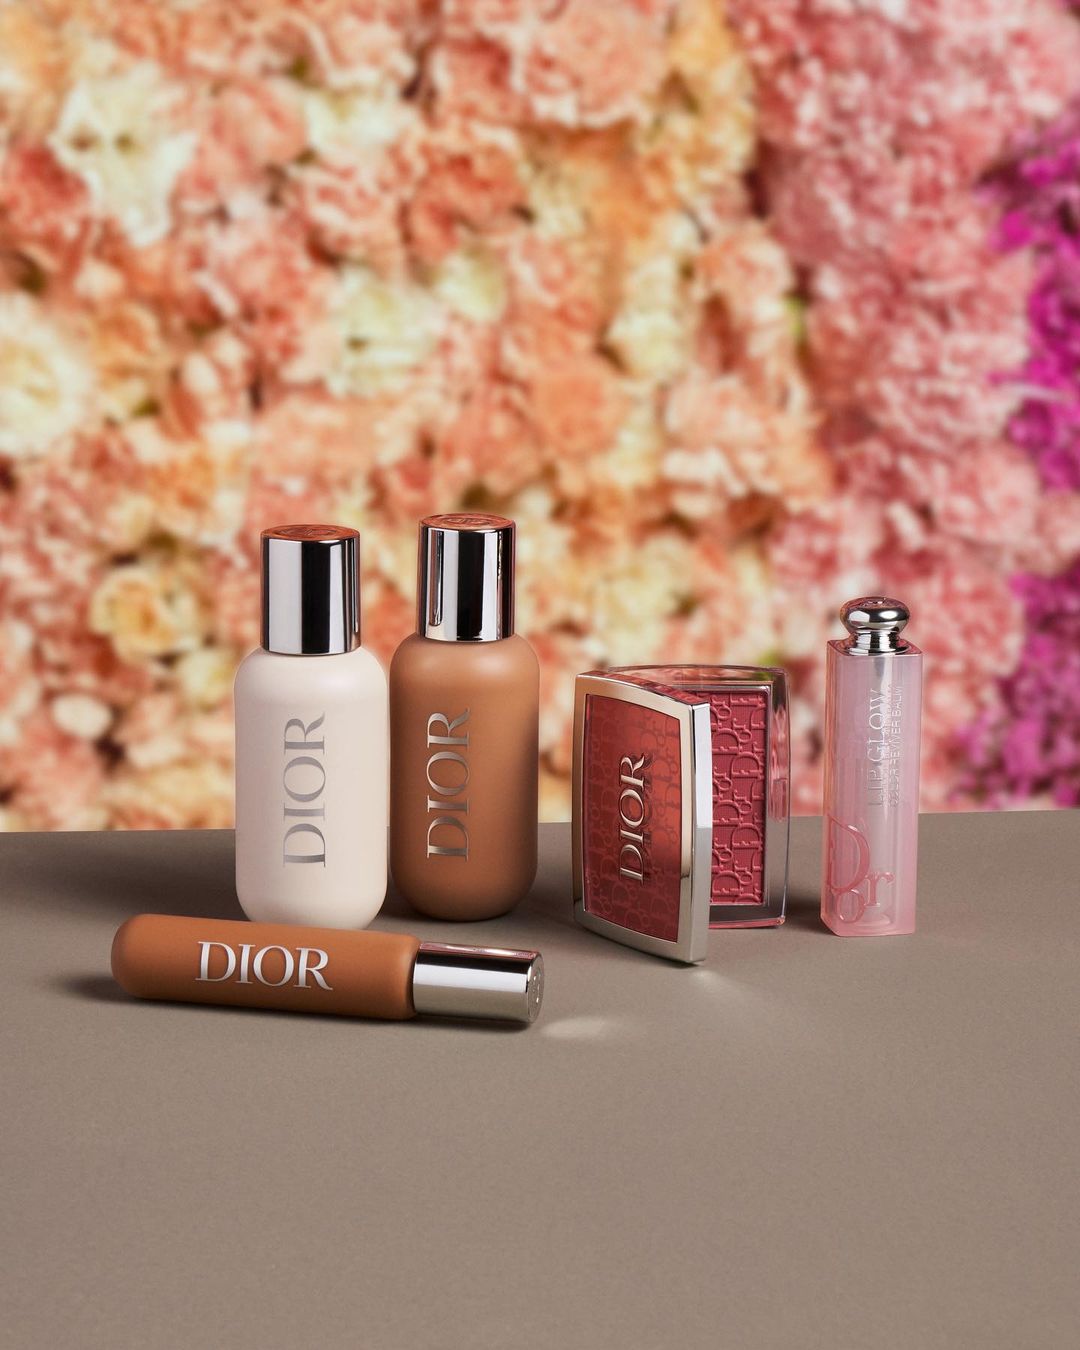 Image of an assortment of Dior beauty products with a floral backdrop